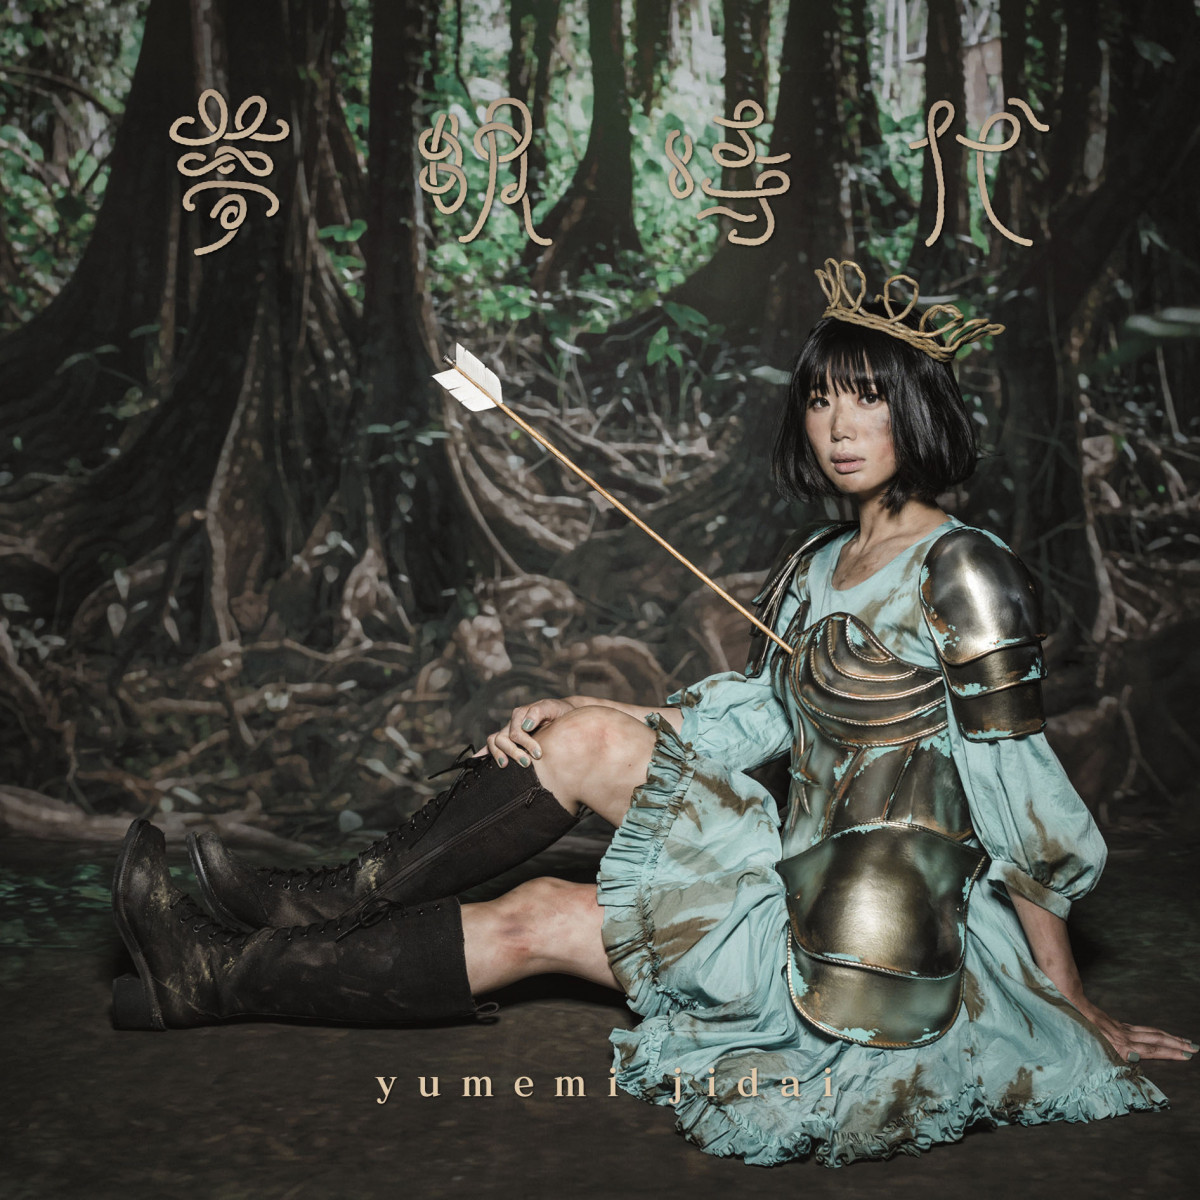 Nemu Yumemi Releases Trailer for First and Only Solo Album